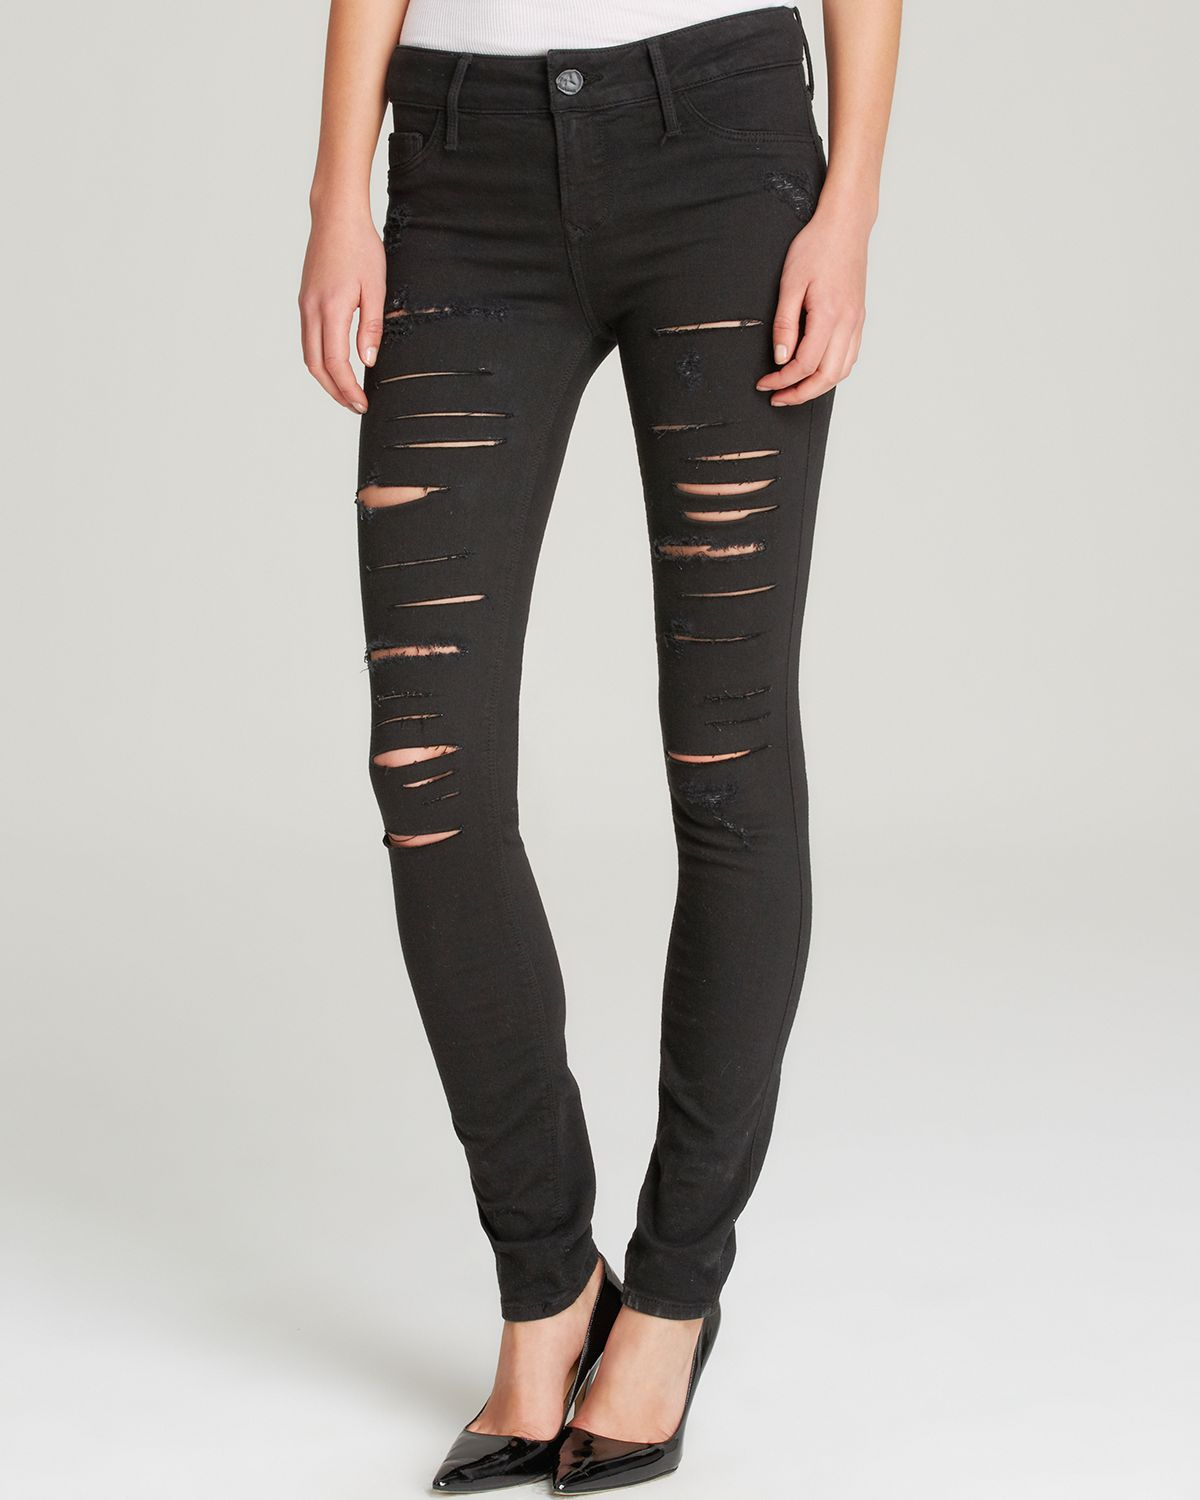 Lyst - Black Orchid Jeans - Jude Super Skinny In Get Lucky in Black